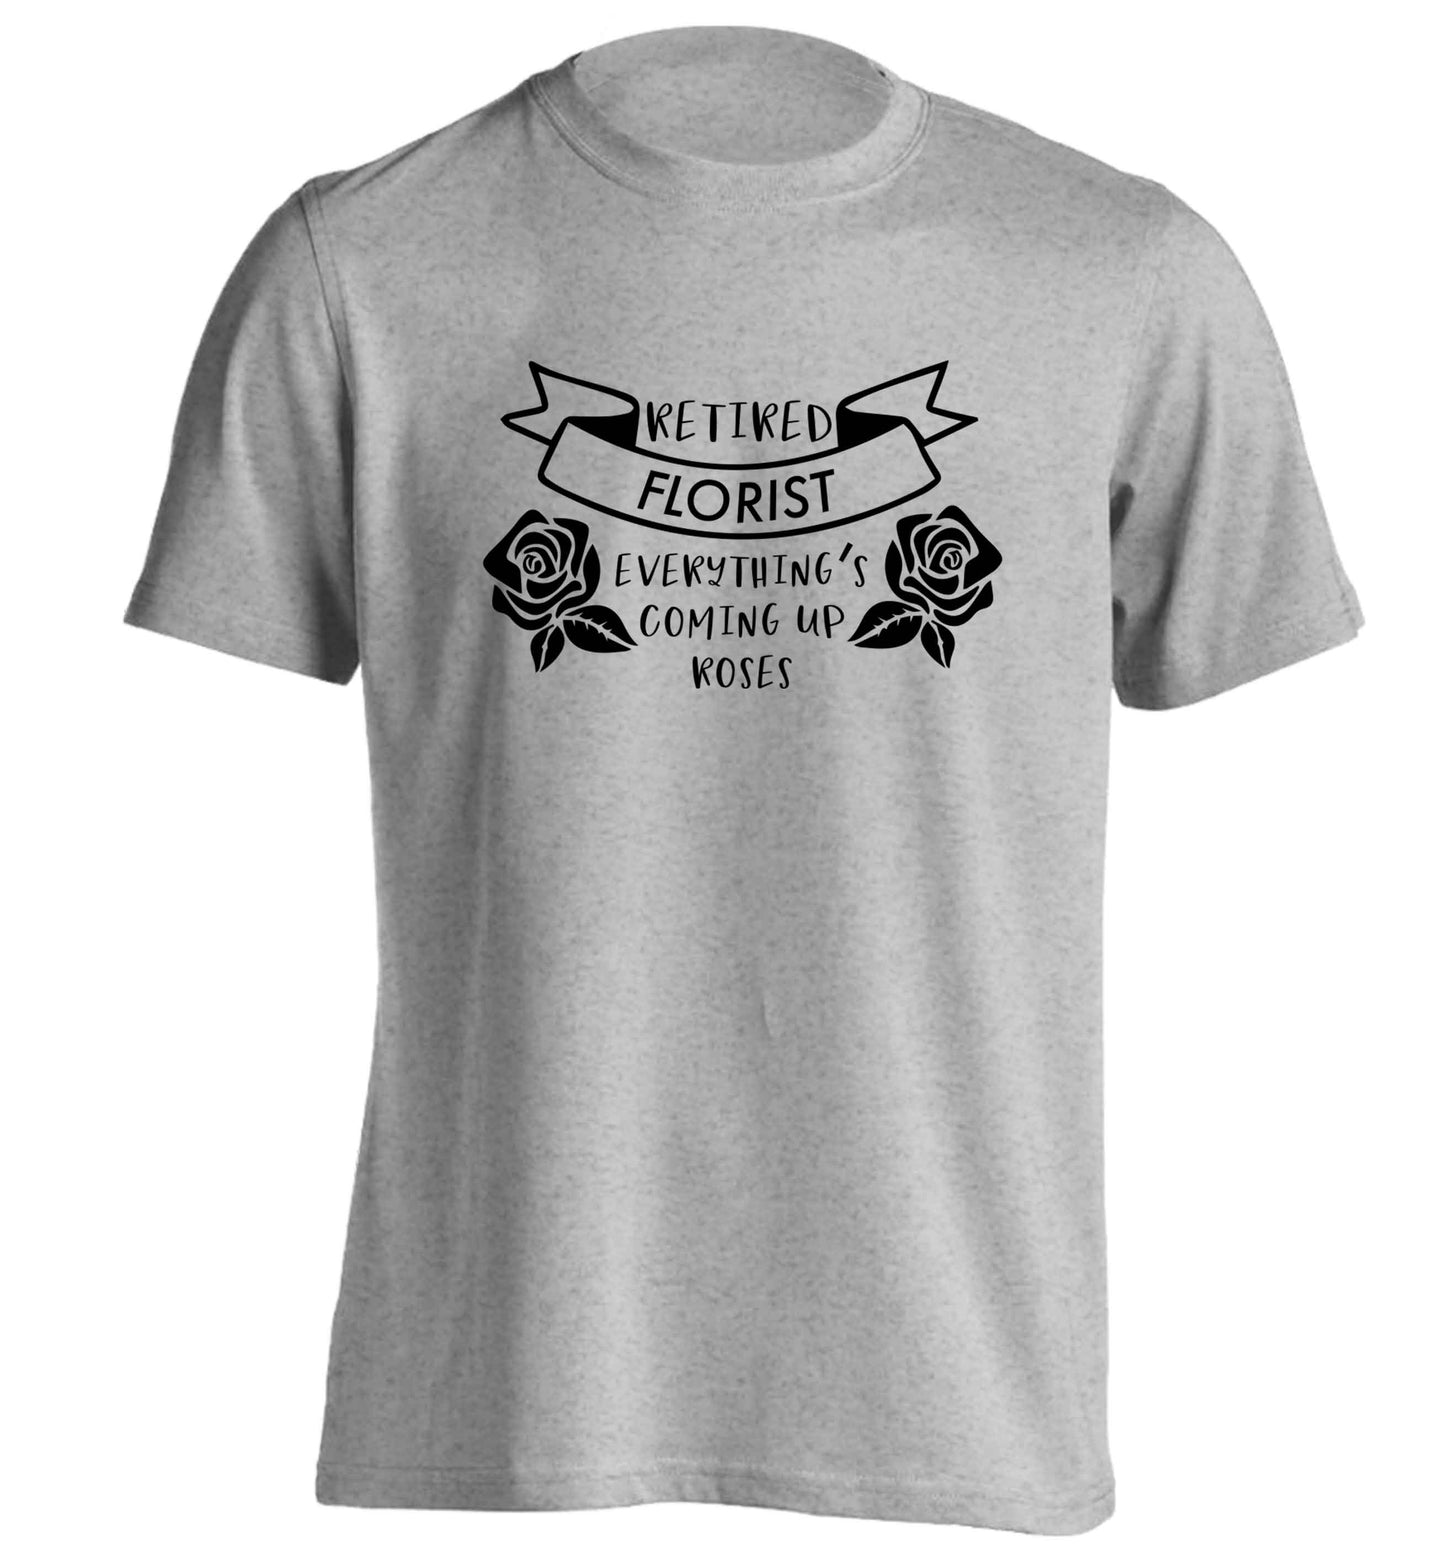 Retired florist everything's coming up roses adults unisex grey Tshirt 2XL